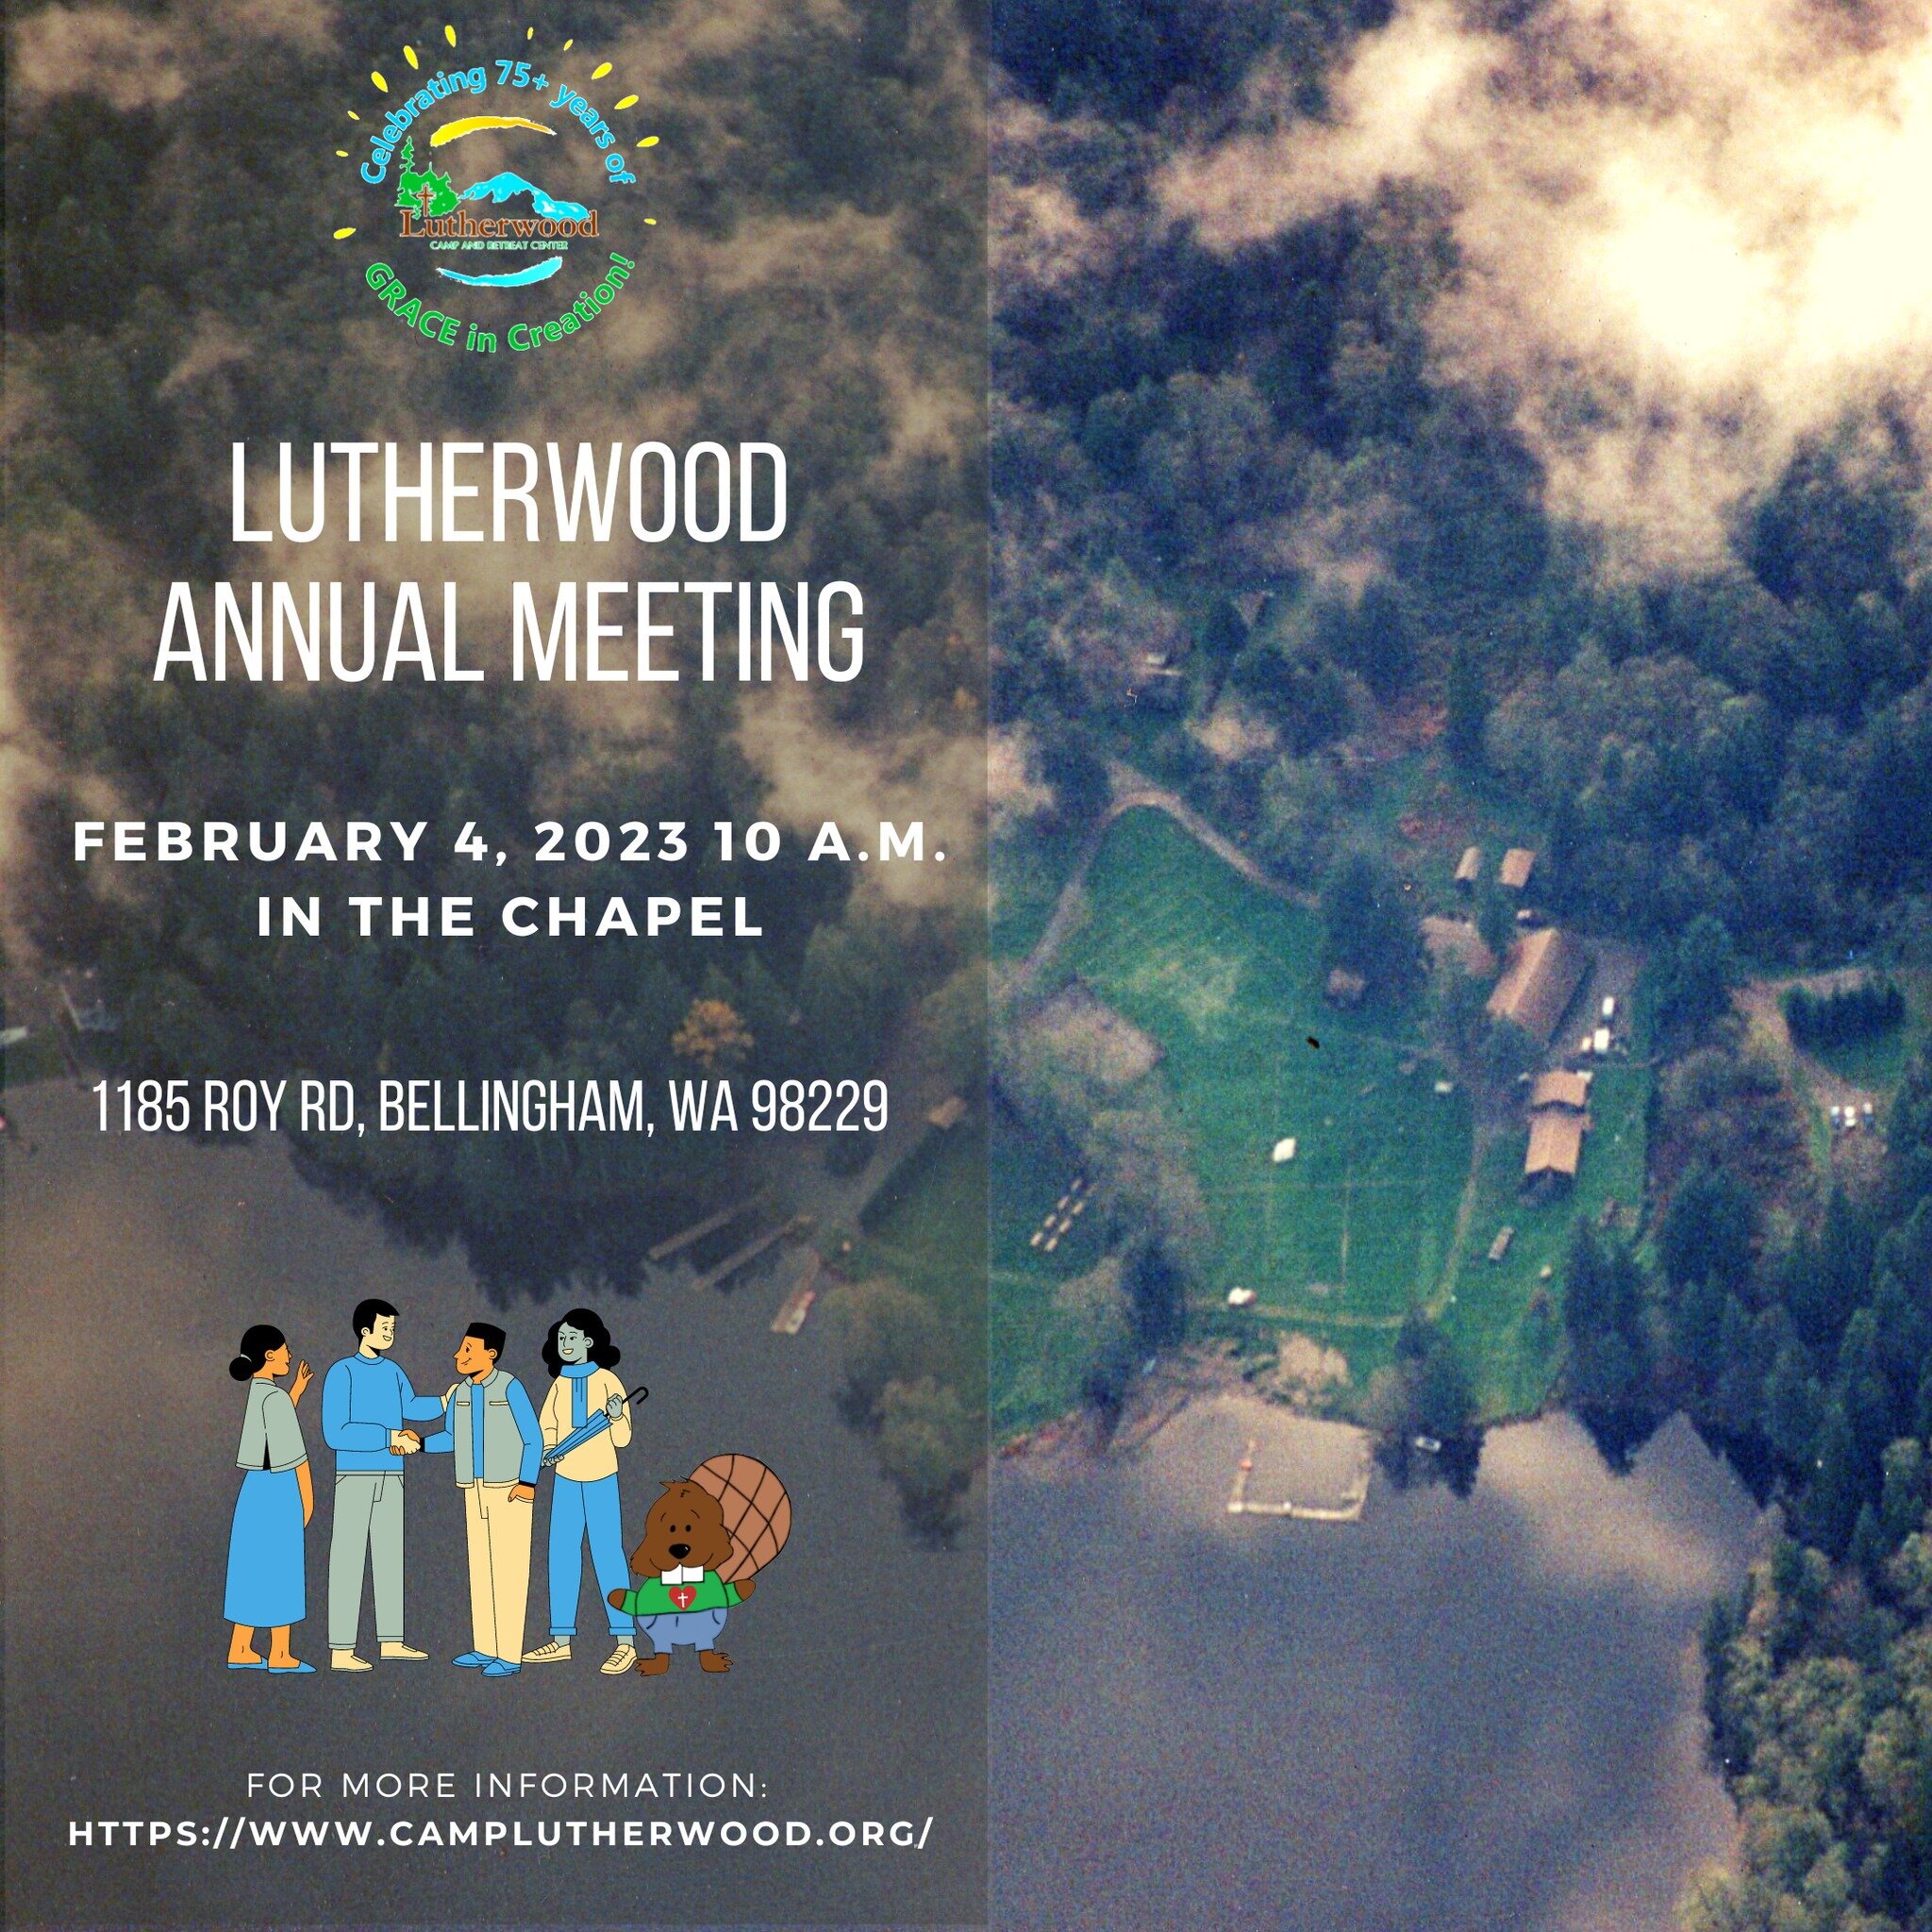 February 4, 2023, at 10 a.m. We will gather in the chapel at Lutherwood. Please check with the camp office to see if your congregation is a contributing member and come and vote. Each member congregation can send 1 clergy member and 2 lay members. (o